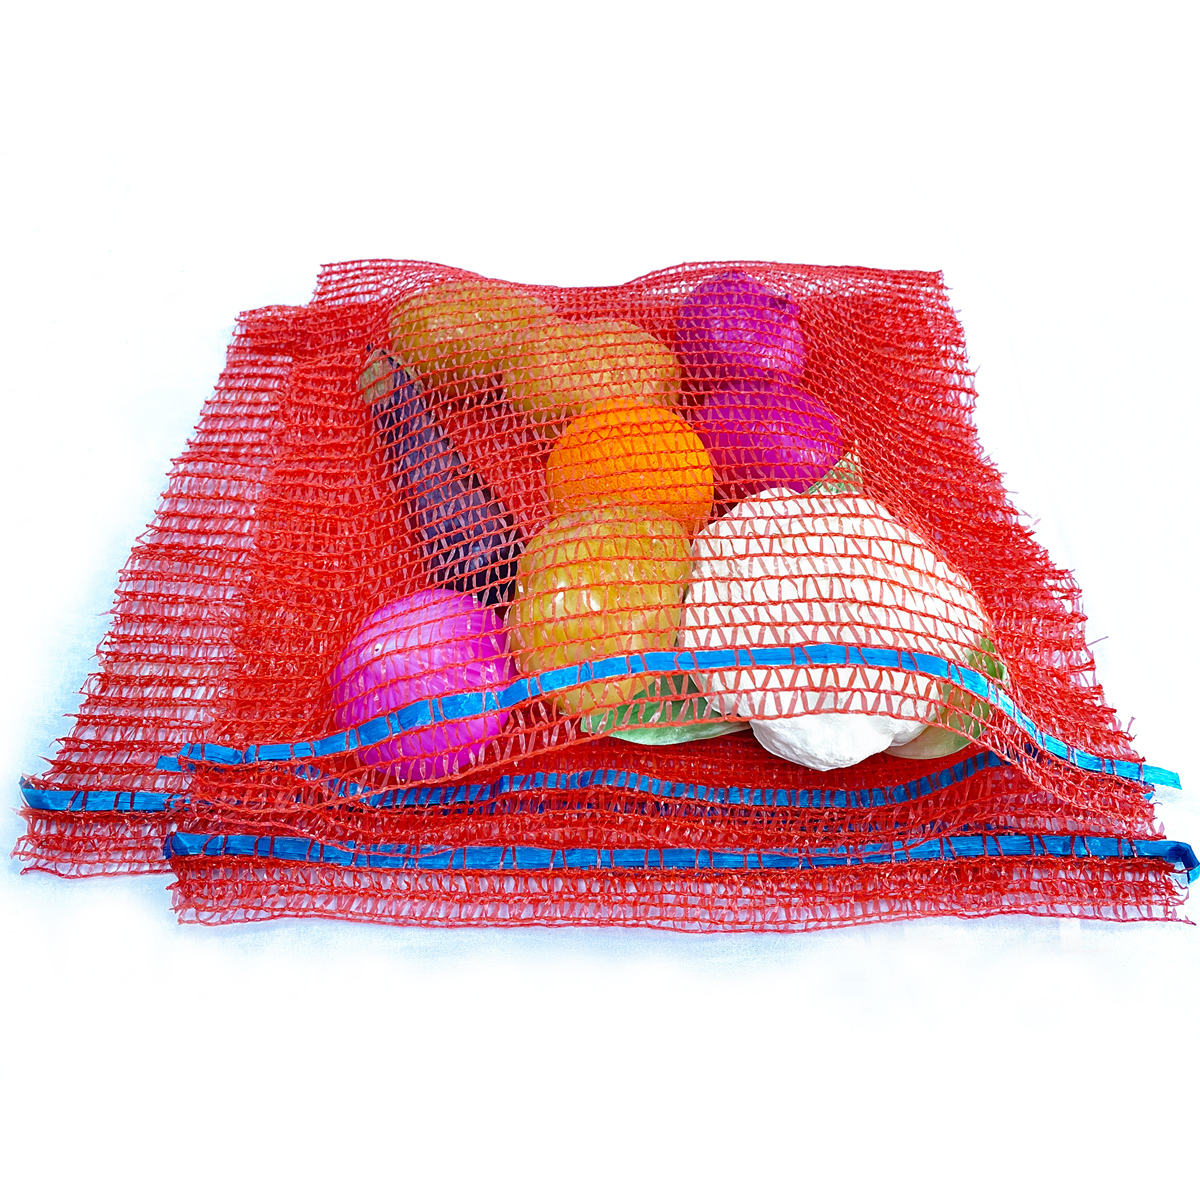 raschel mesh bag from China for packaging fruits and vegetables such as potatoes and onions